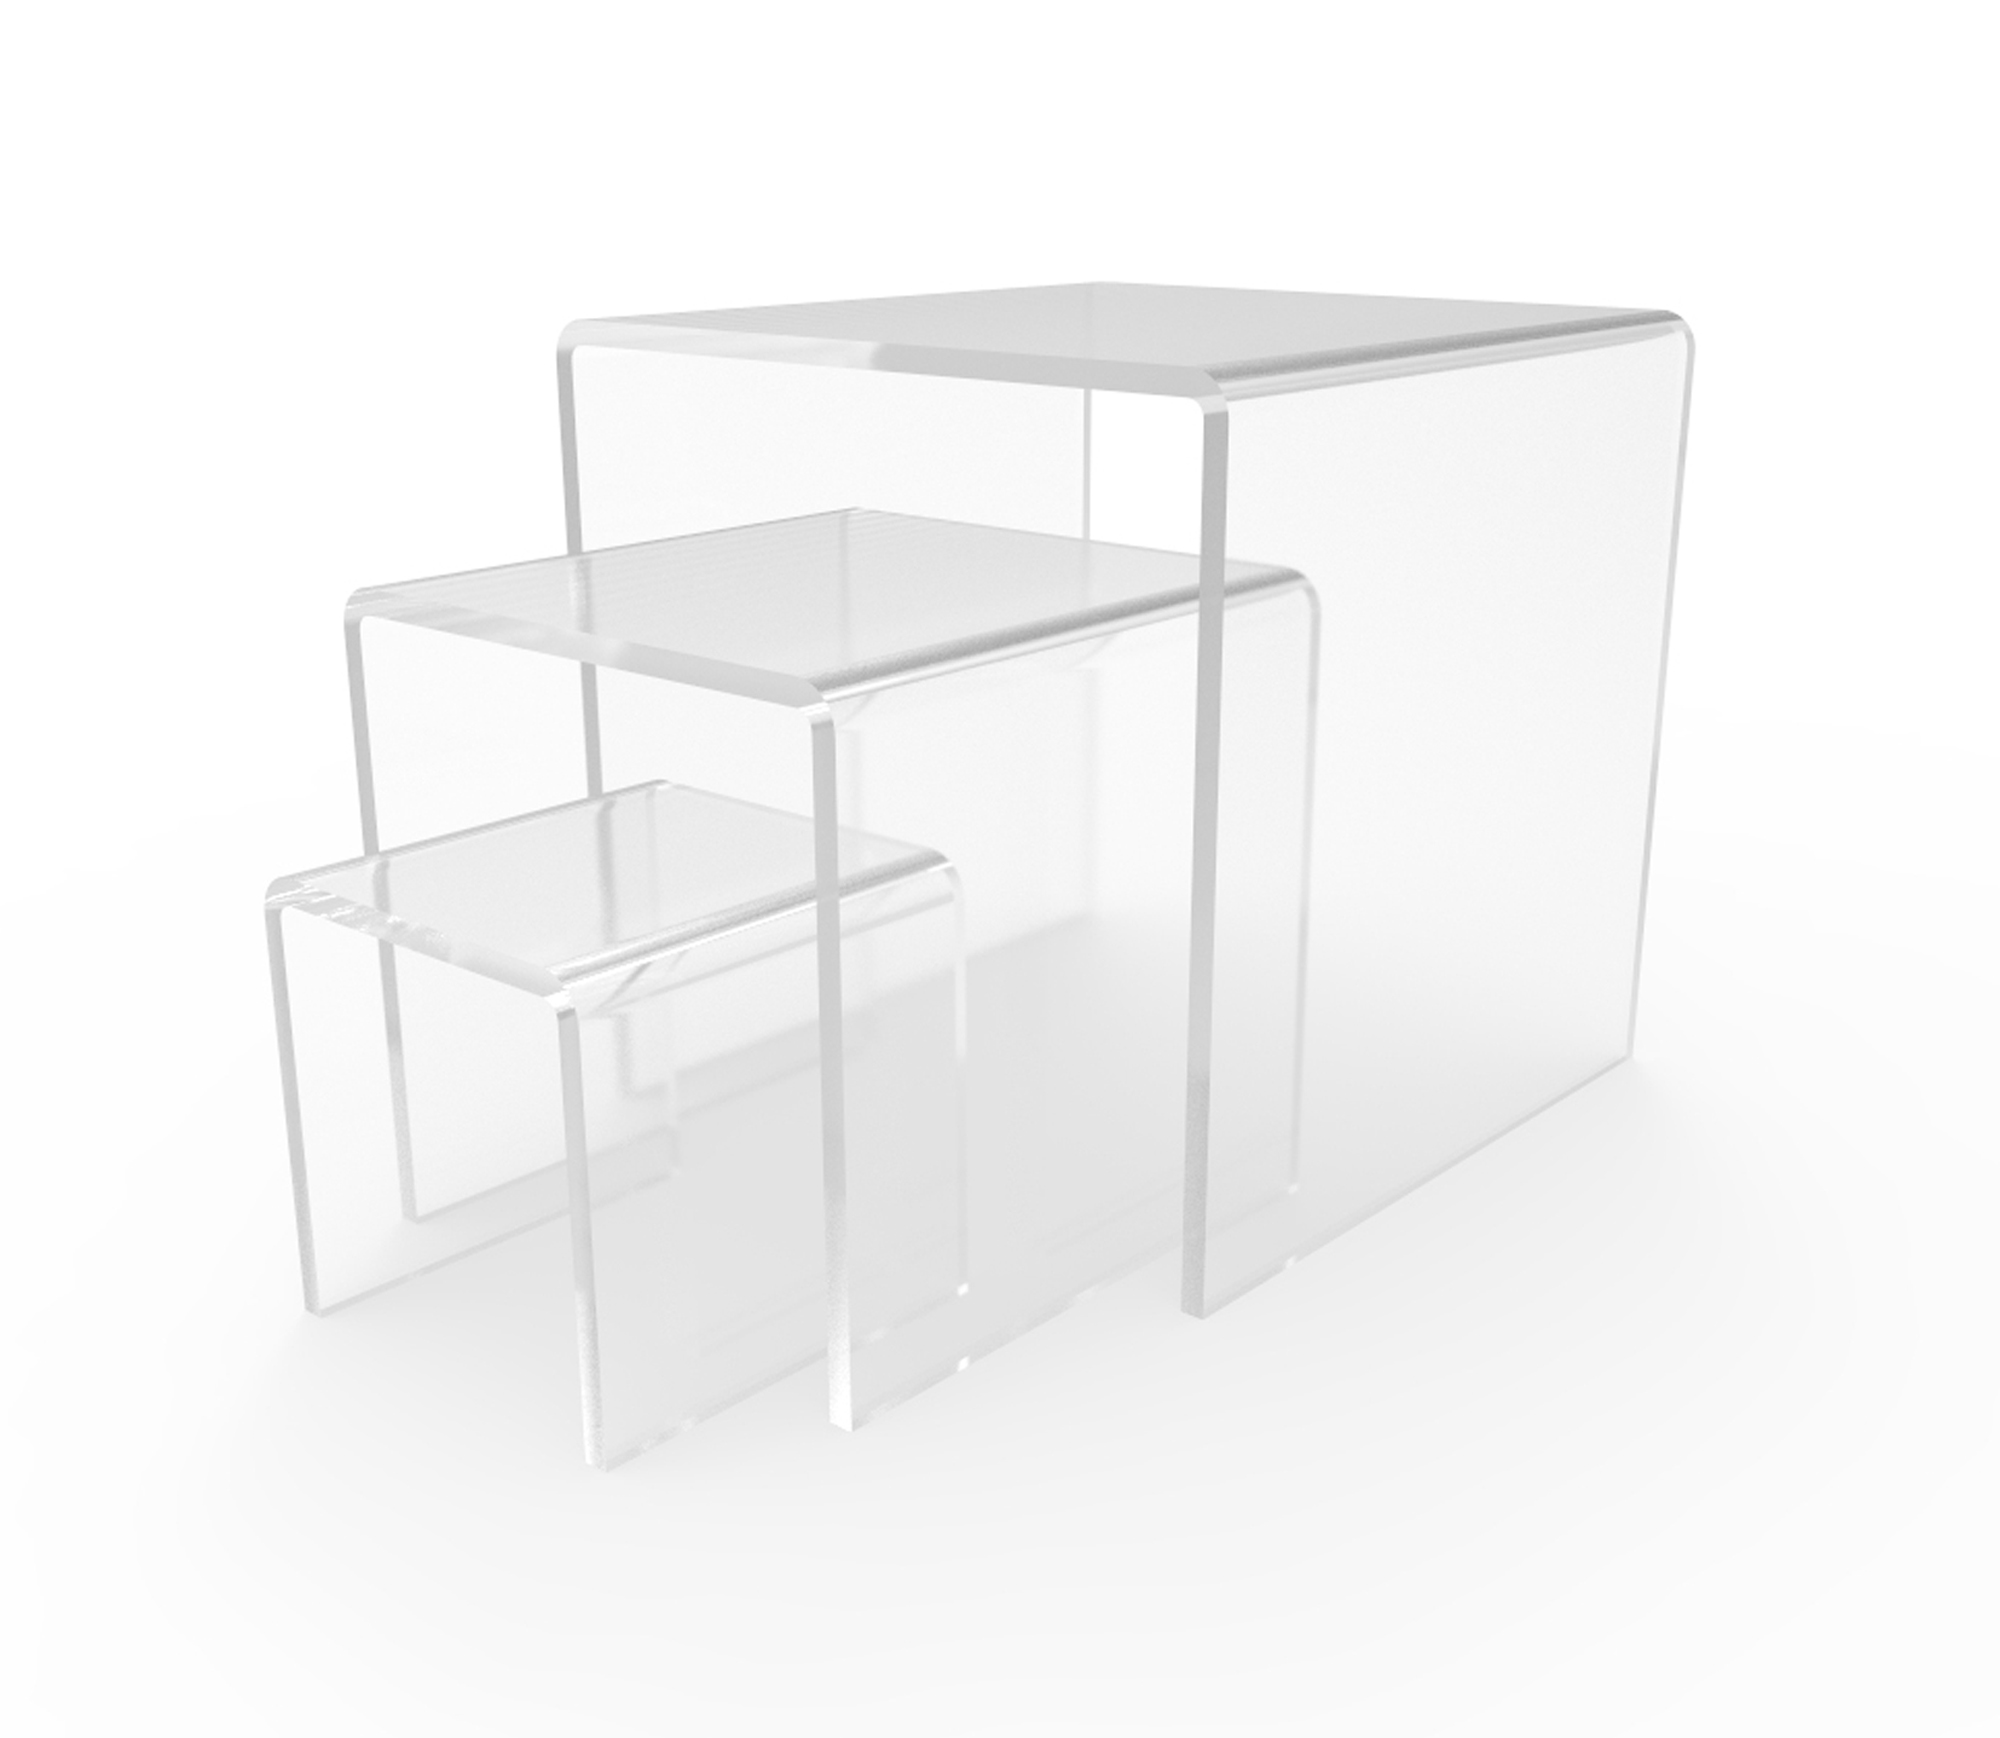 FixtureDisplays Three Riser Combo 2", 3", 4" Cube 3-Sided Clear Plexiglass Pedestal Lucite Acrylic Display Risers Jewelry Showcase Fixtures